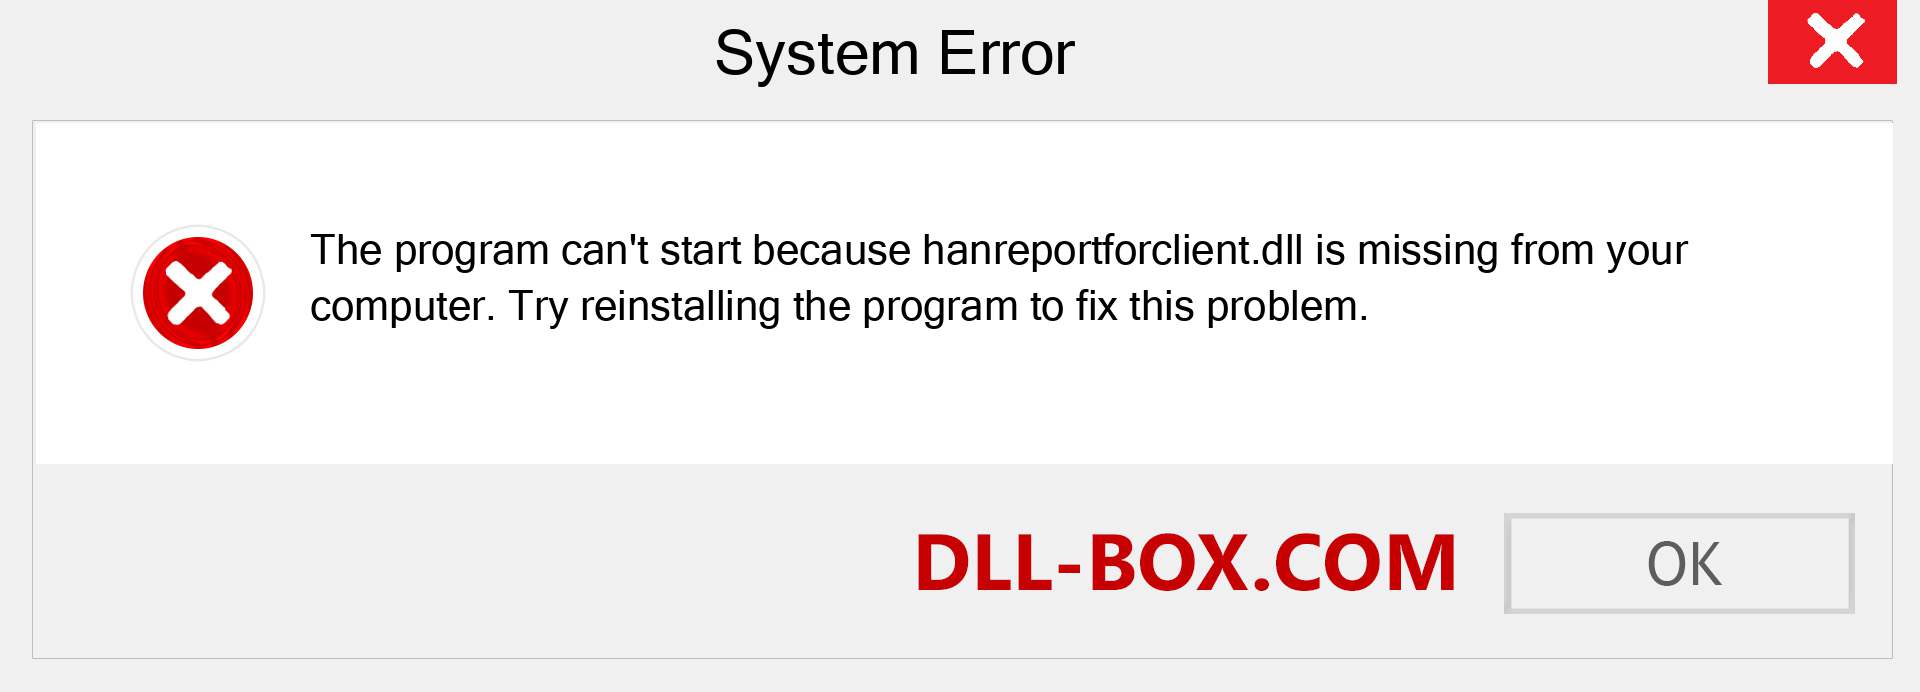  hanreportforclient.dll file is missing?. Download for Windows 7, 8, 10 - Fix  hanreportforclient dll Missing Error on Windows, photos, images